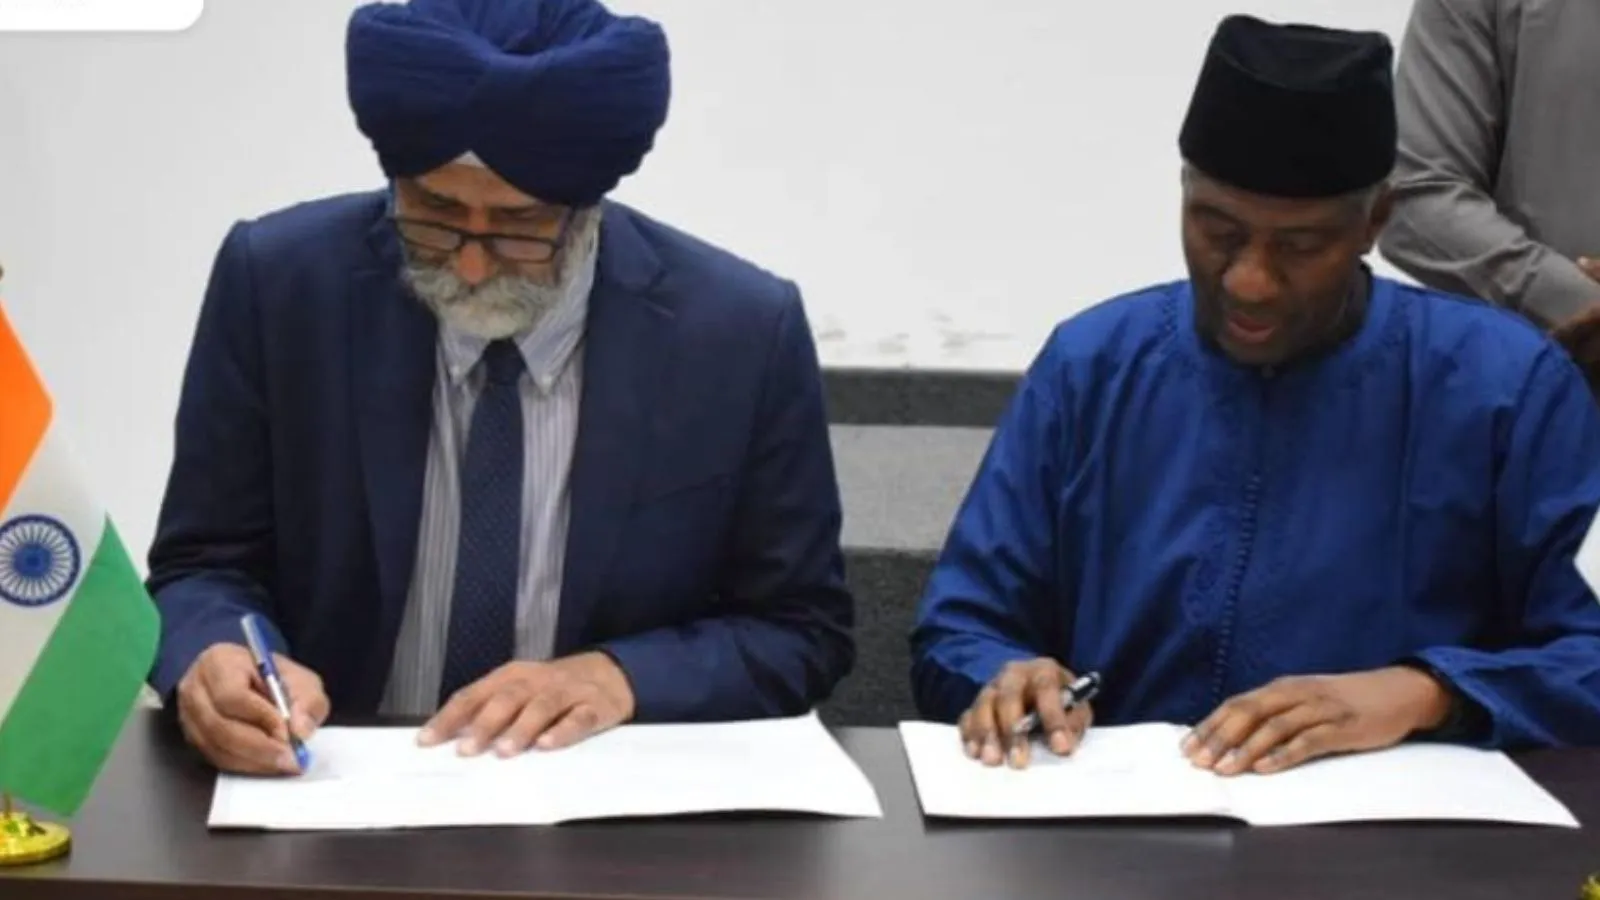 India-Nigeria trade officials meet as China’s investments in Africa falter | Business News